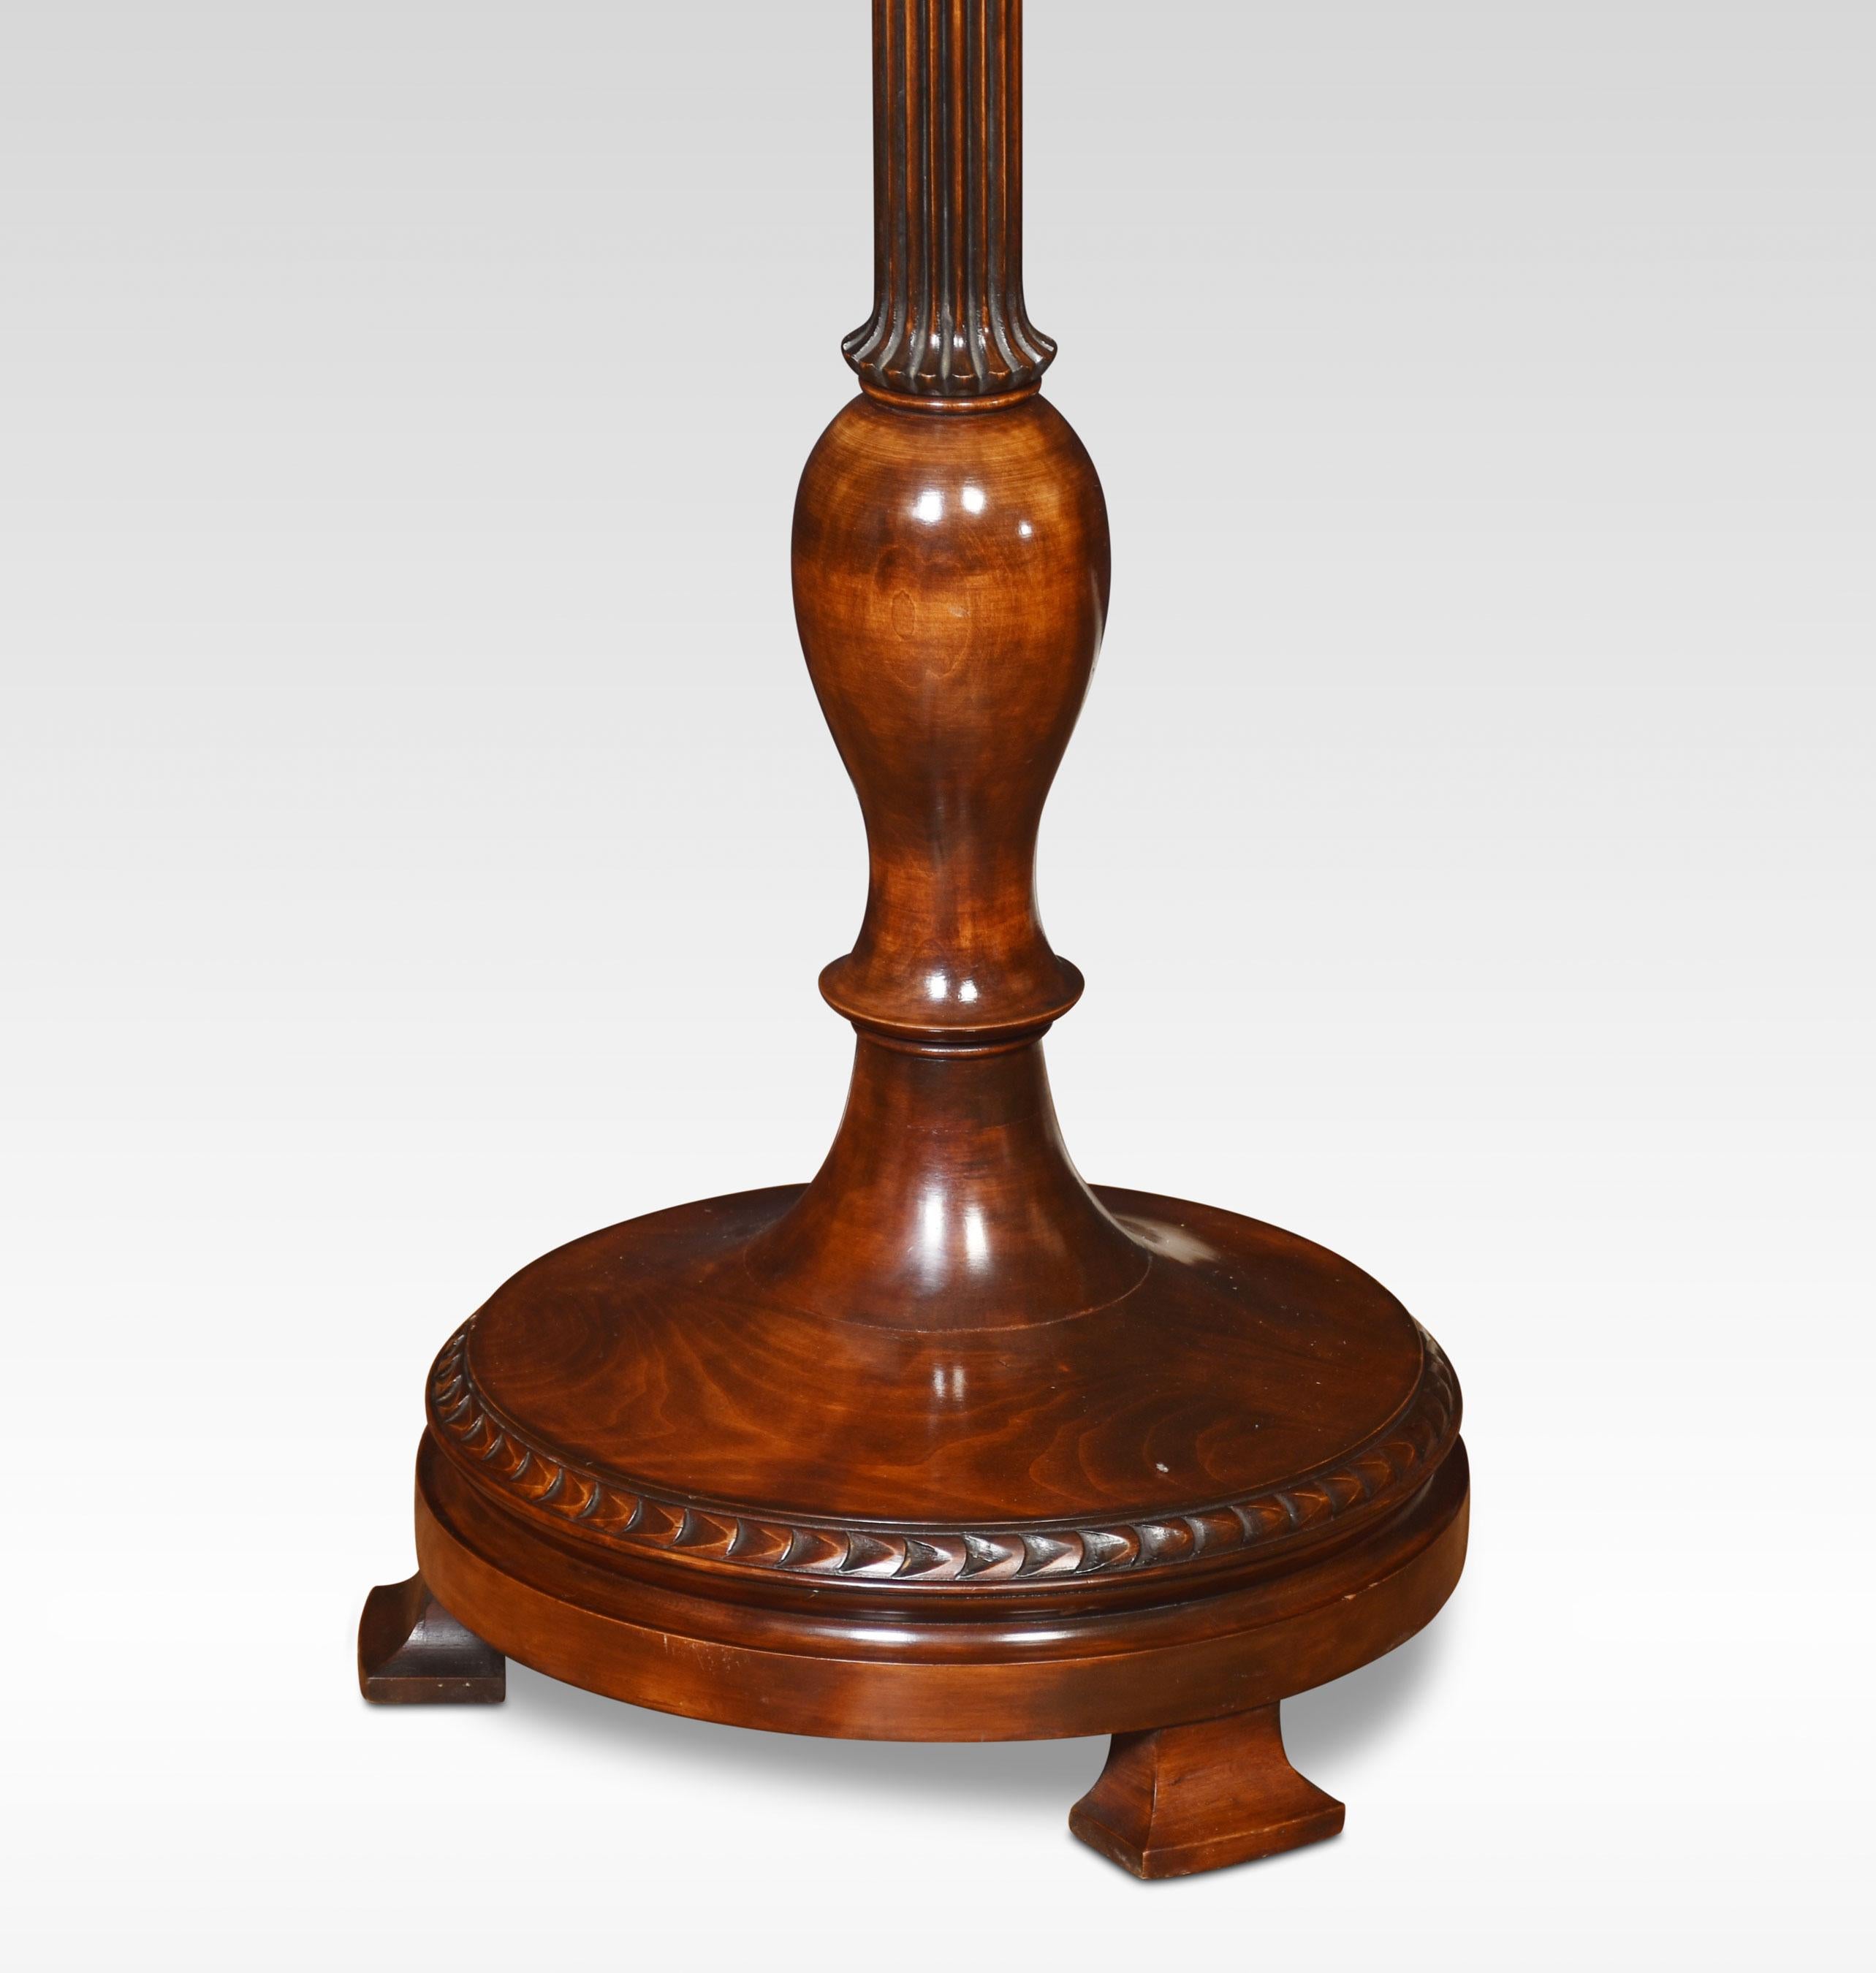 Walnut standard lamp, the tapered column carved with acanthus and reeded decoration. All raised up on a circular base. The lampshade is not included.
Dimensions:
Height 62.5 Inches
Width 14 Inches
Depth 14 Inches.